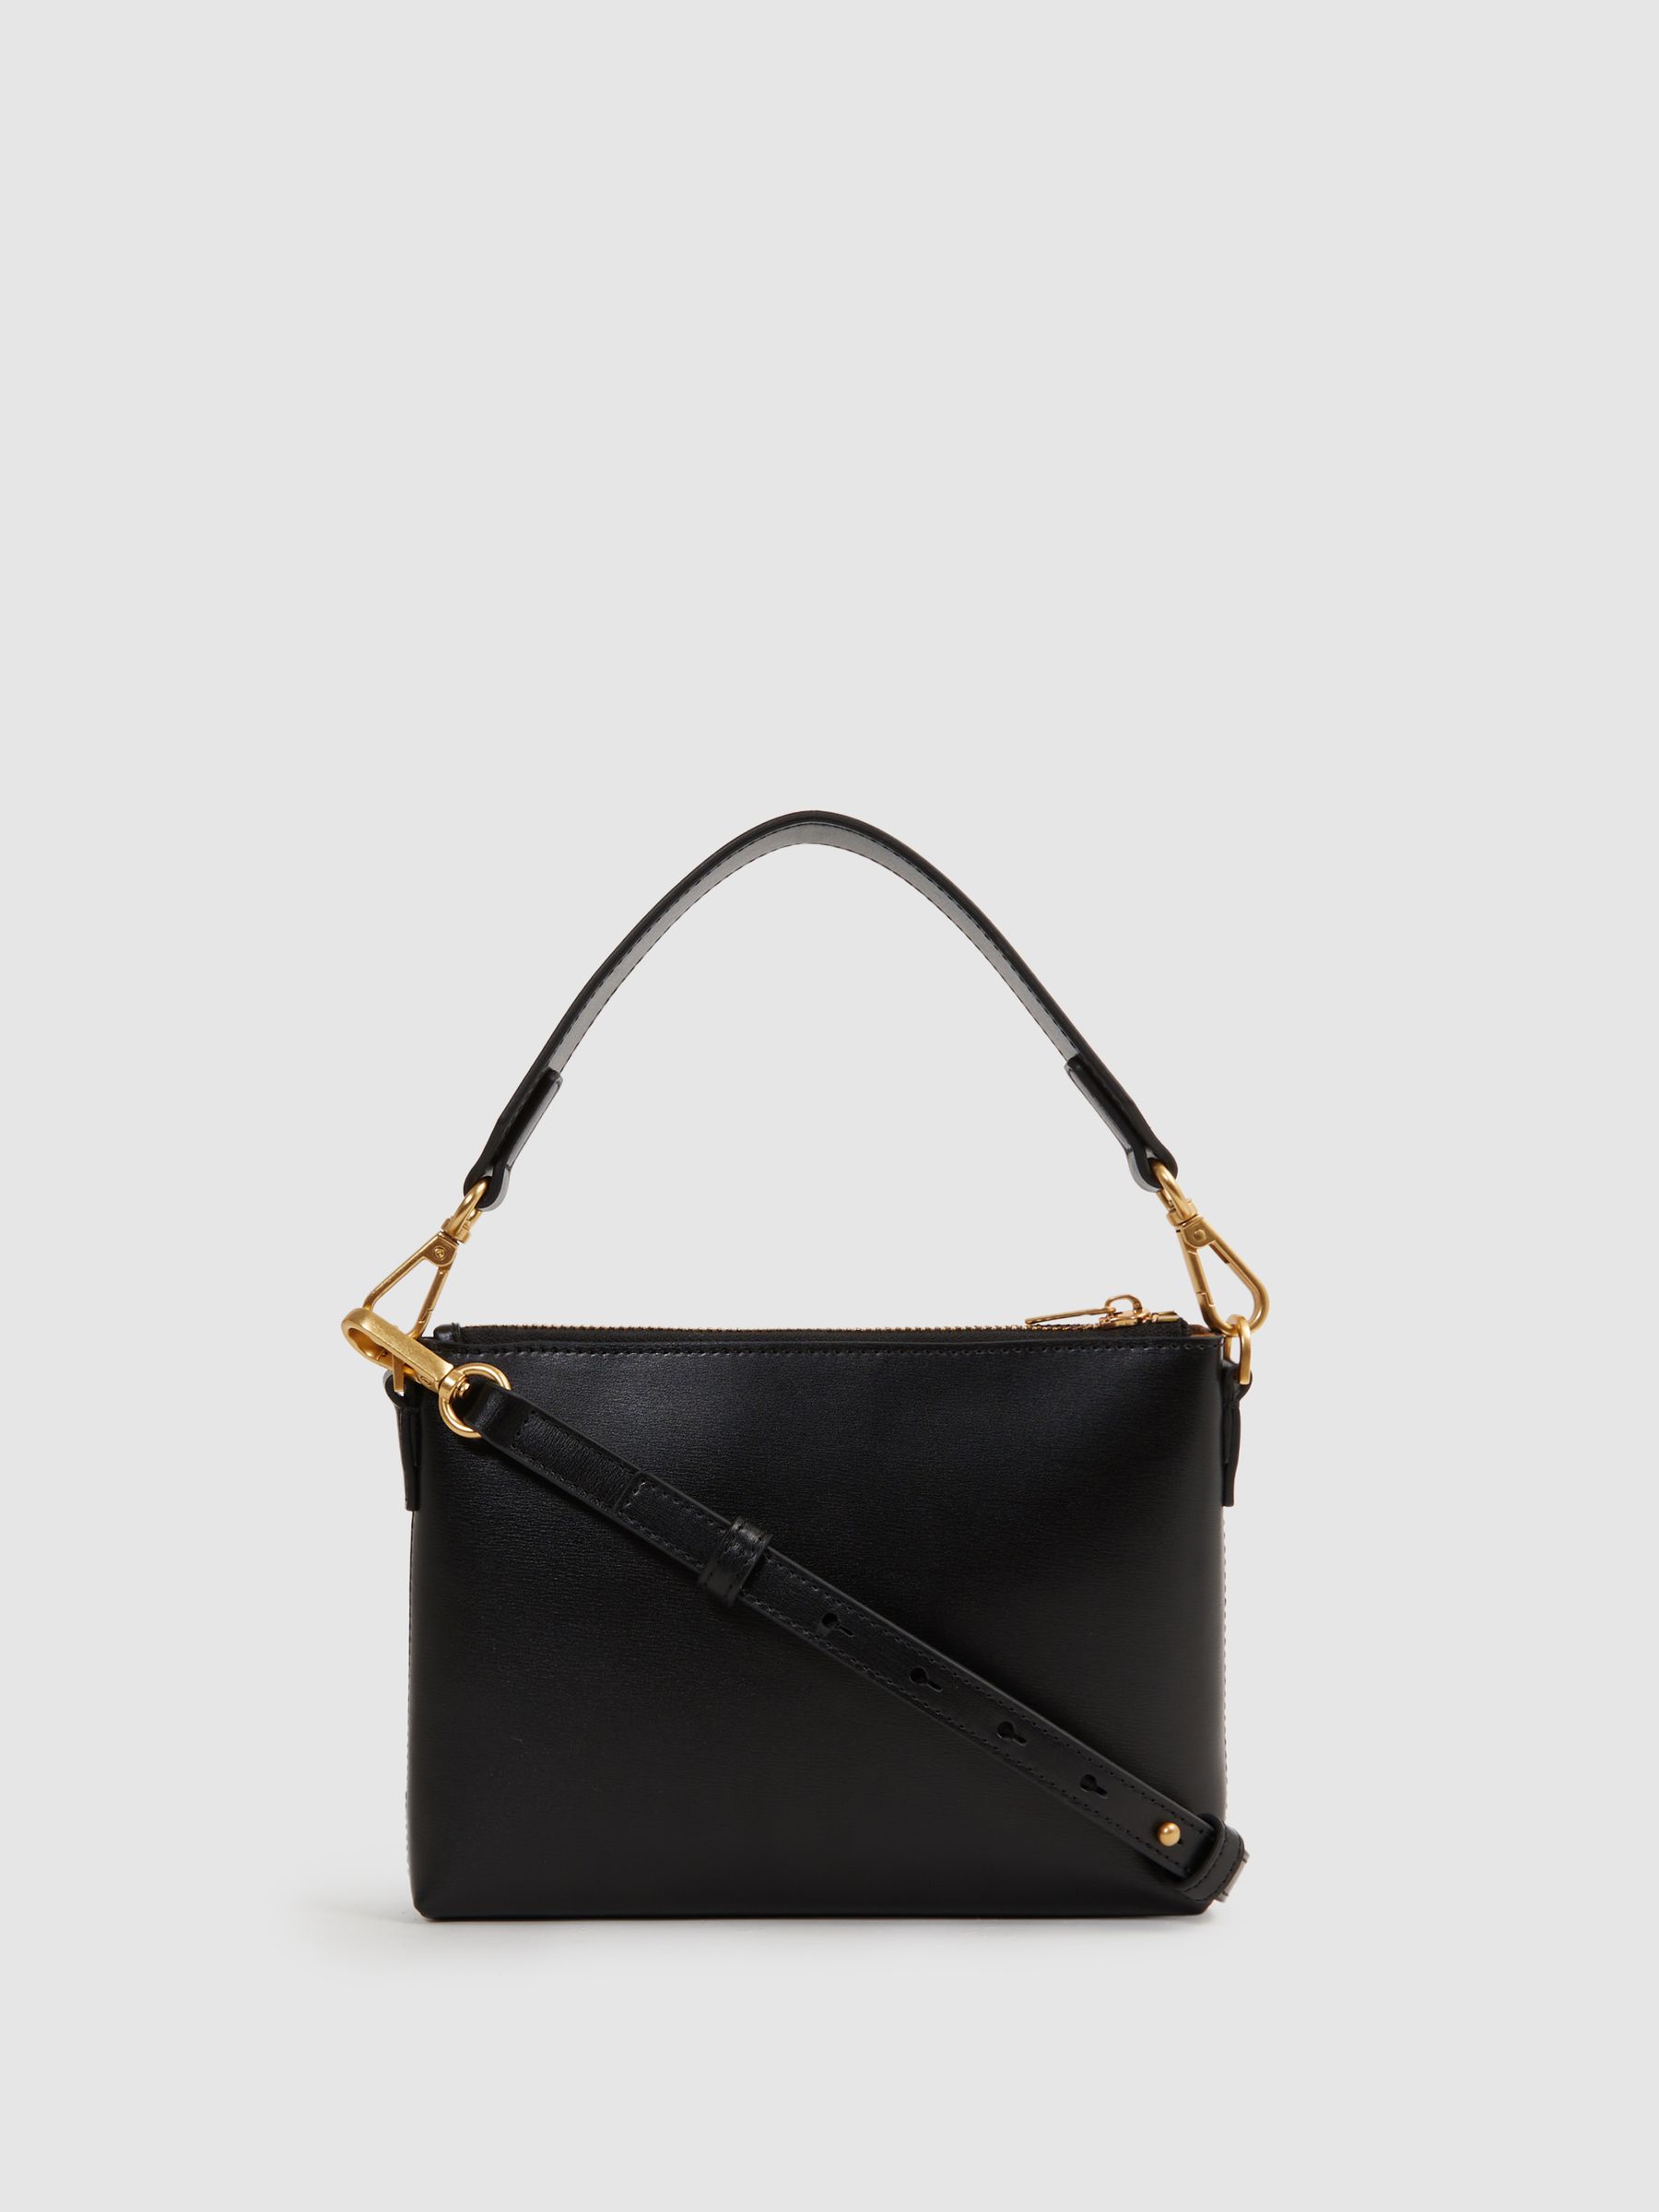 Reiss Brompton Leather Double Strap Pouch Bag | REISS USA